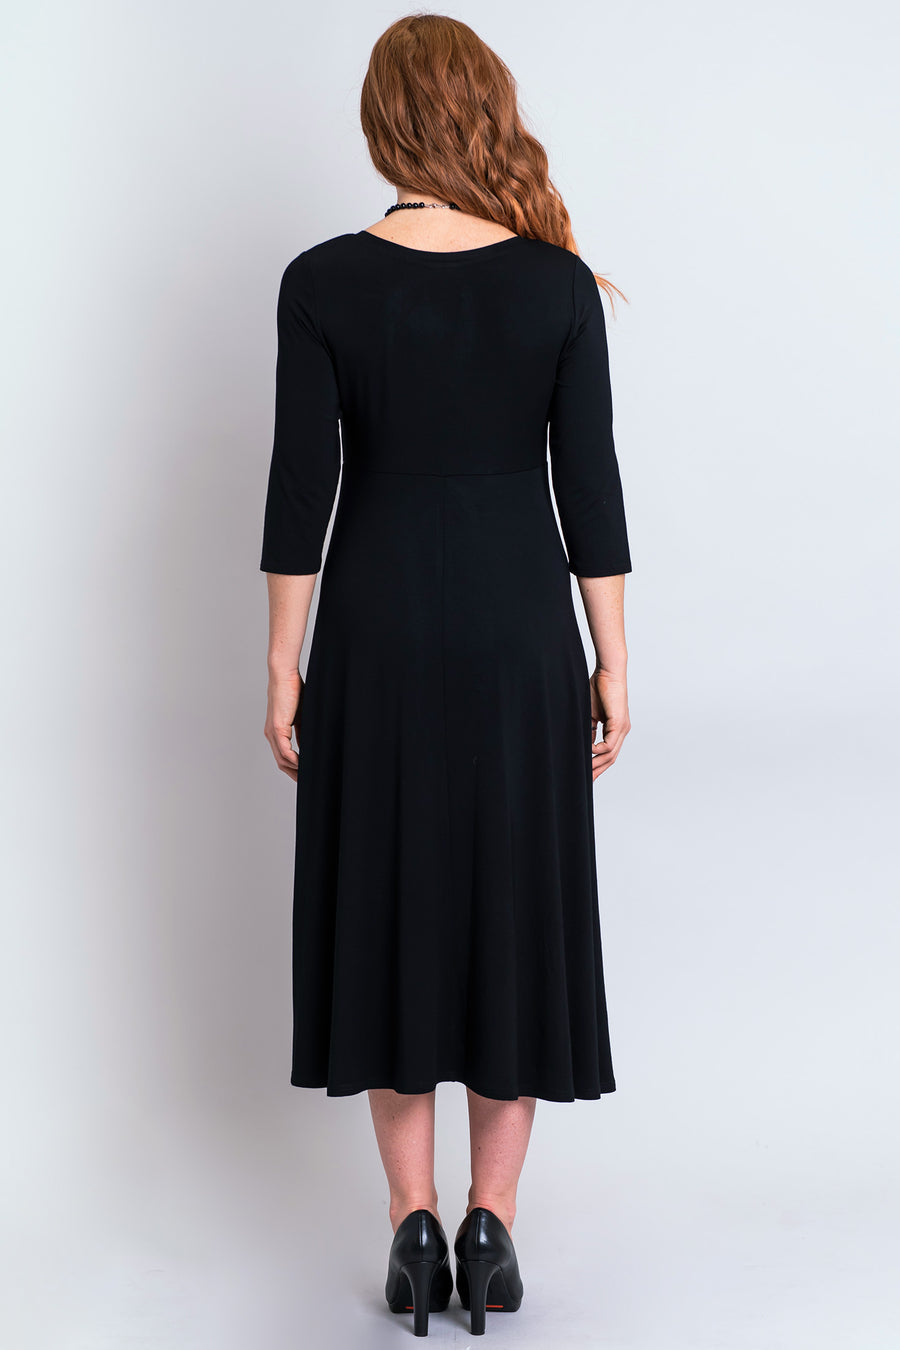 Soul Long Black Dress,by Blue Sky Clothing – Once@426 Boutique and Market